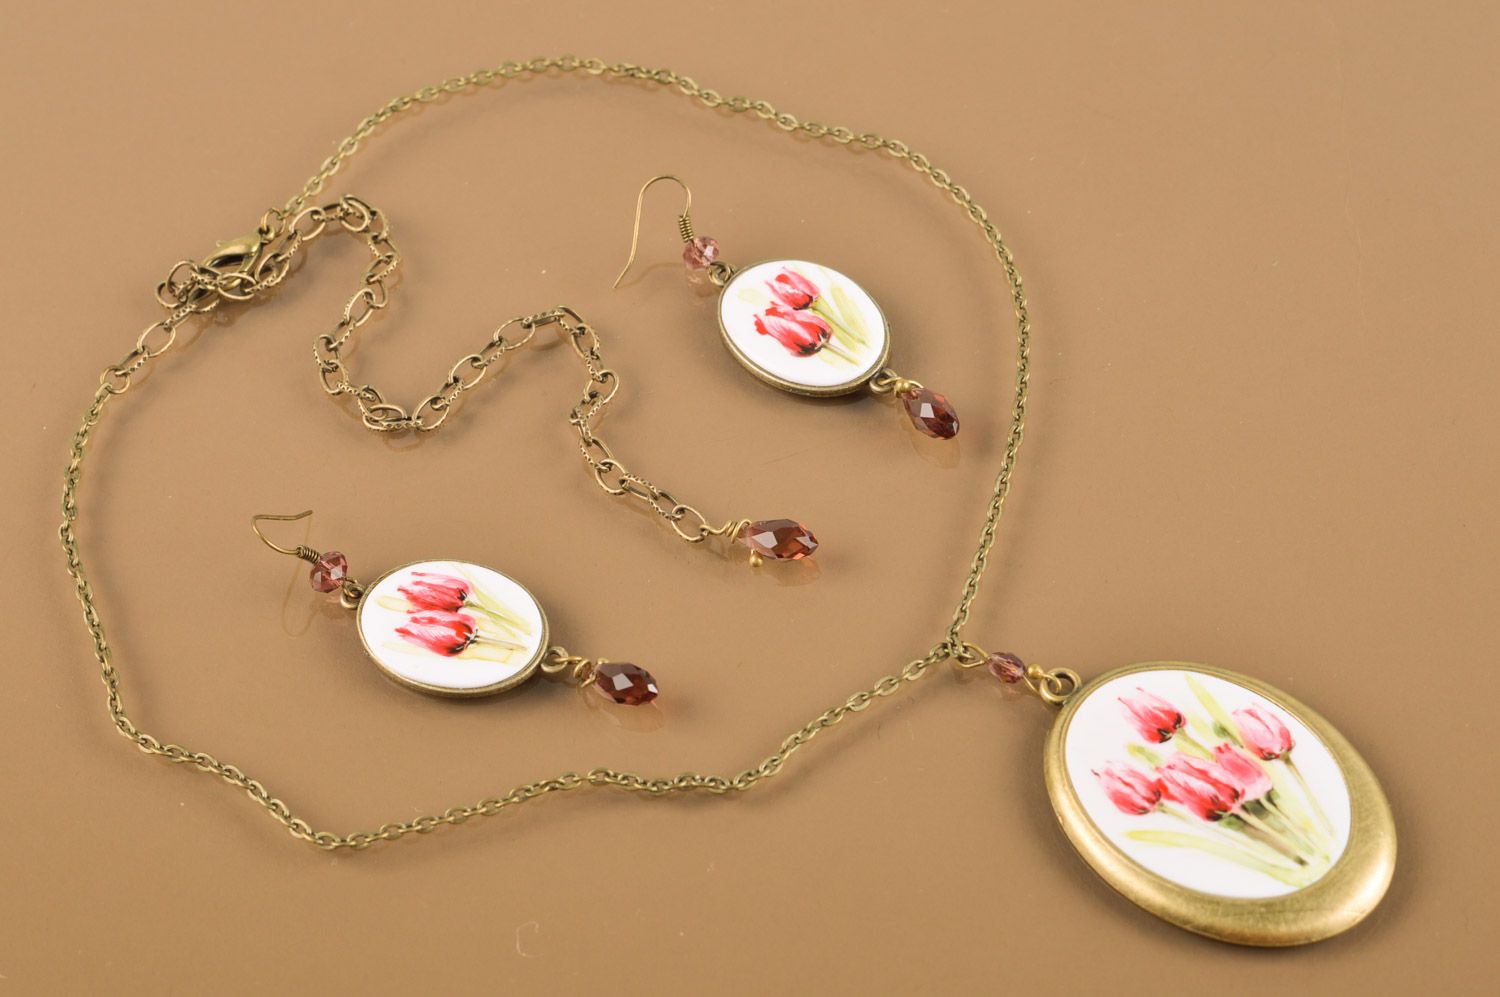 Handmade metal jewelry set with miniature painting 2 items pendant and earrings Tulips photo 2